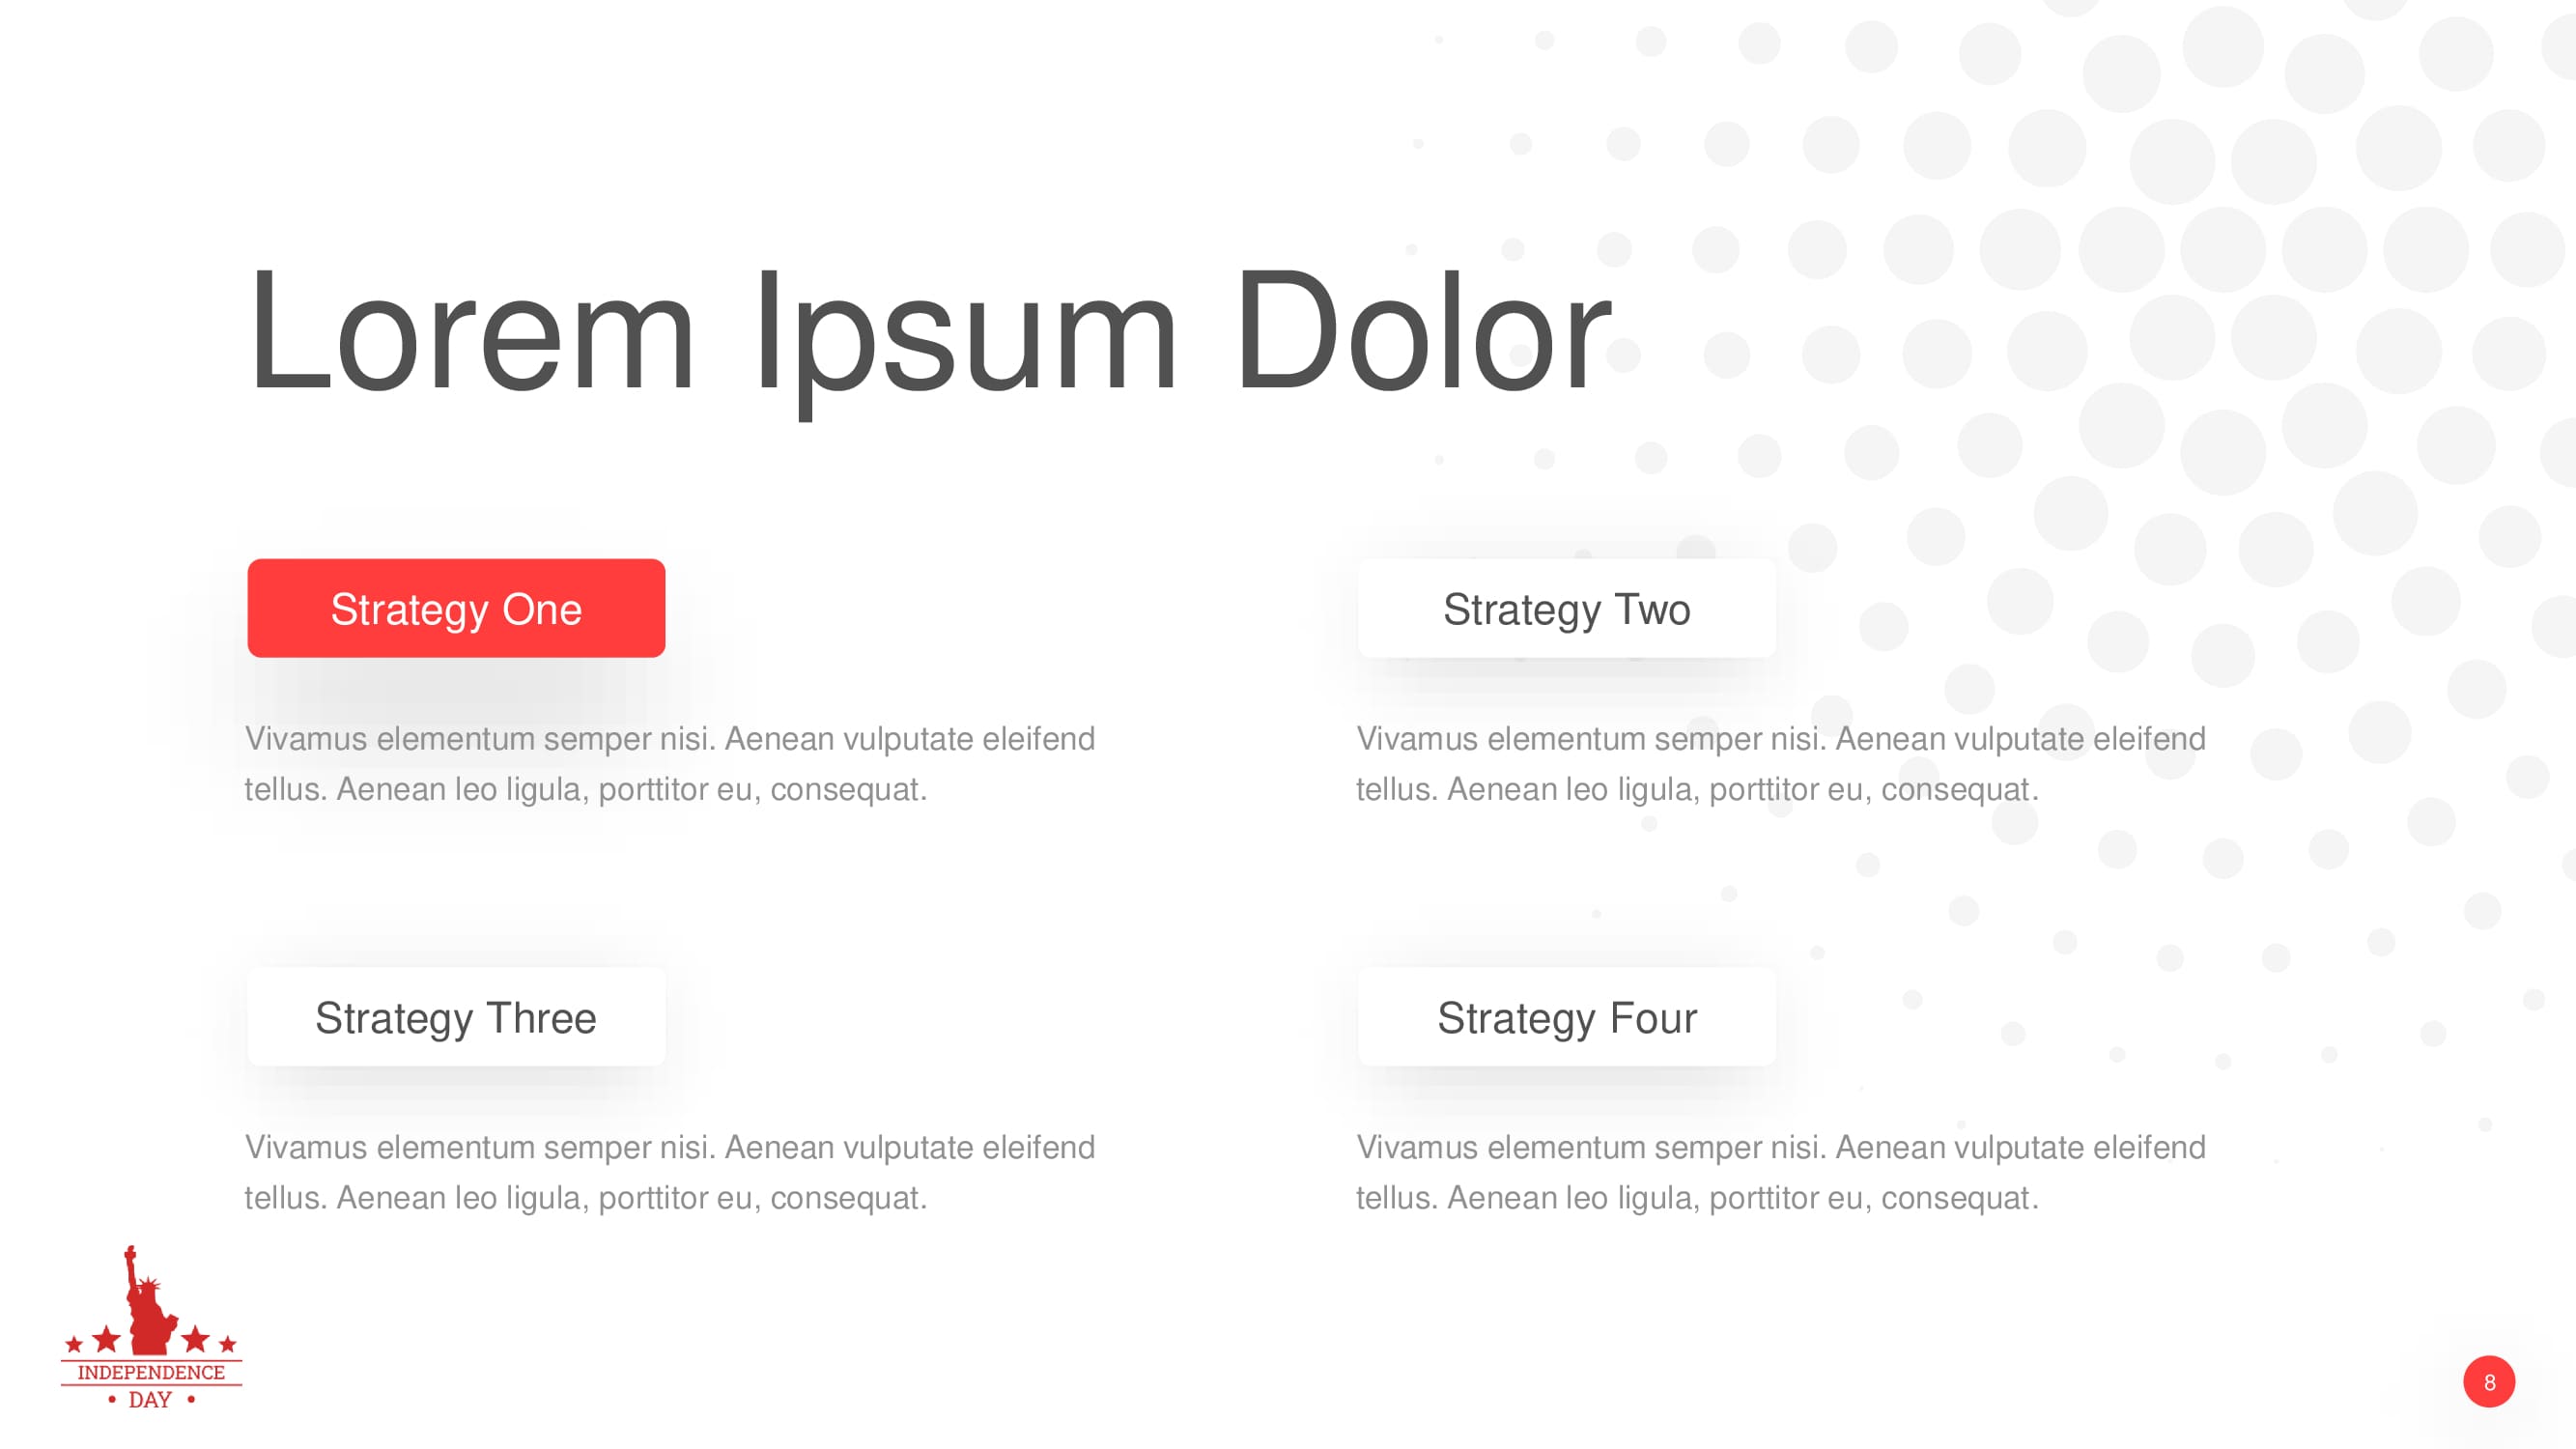 Slide in red, black and white colors with 4 strategy and descriptions for them.